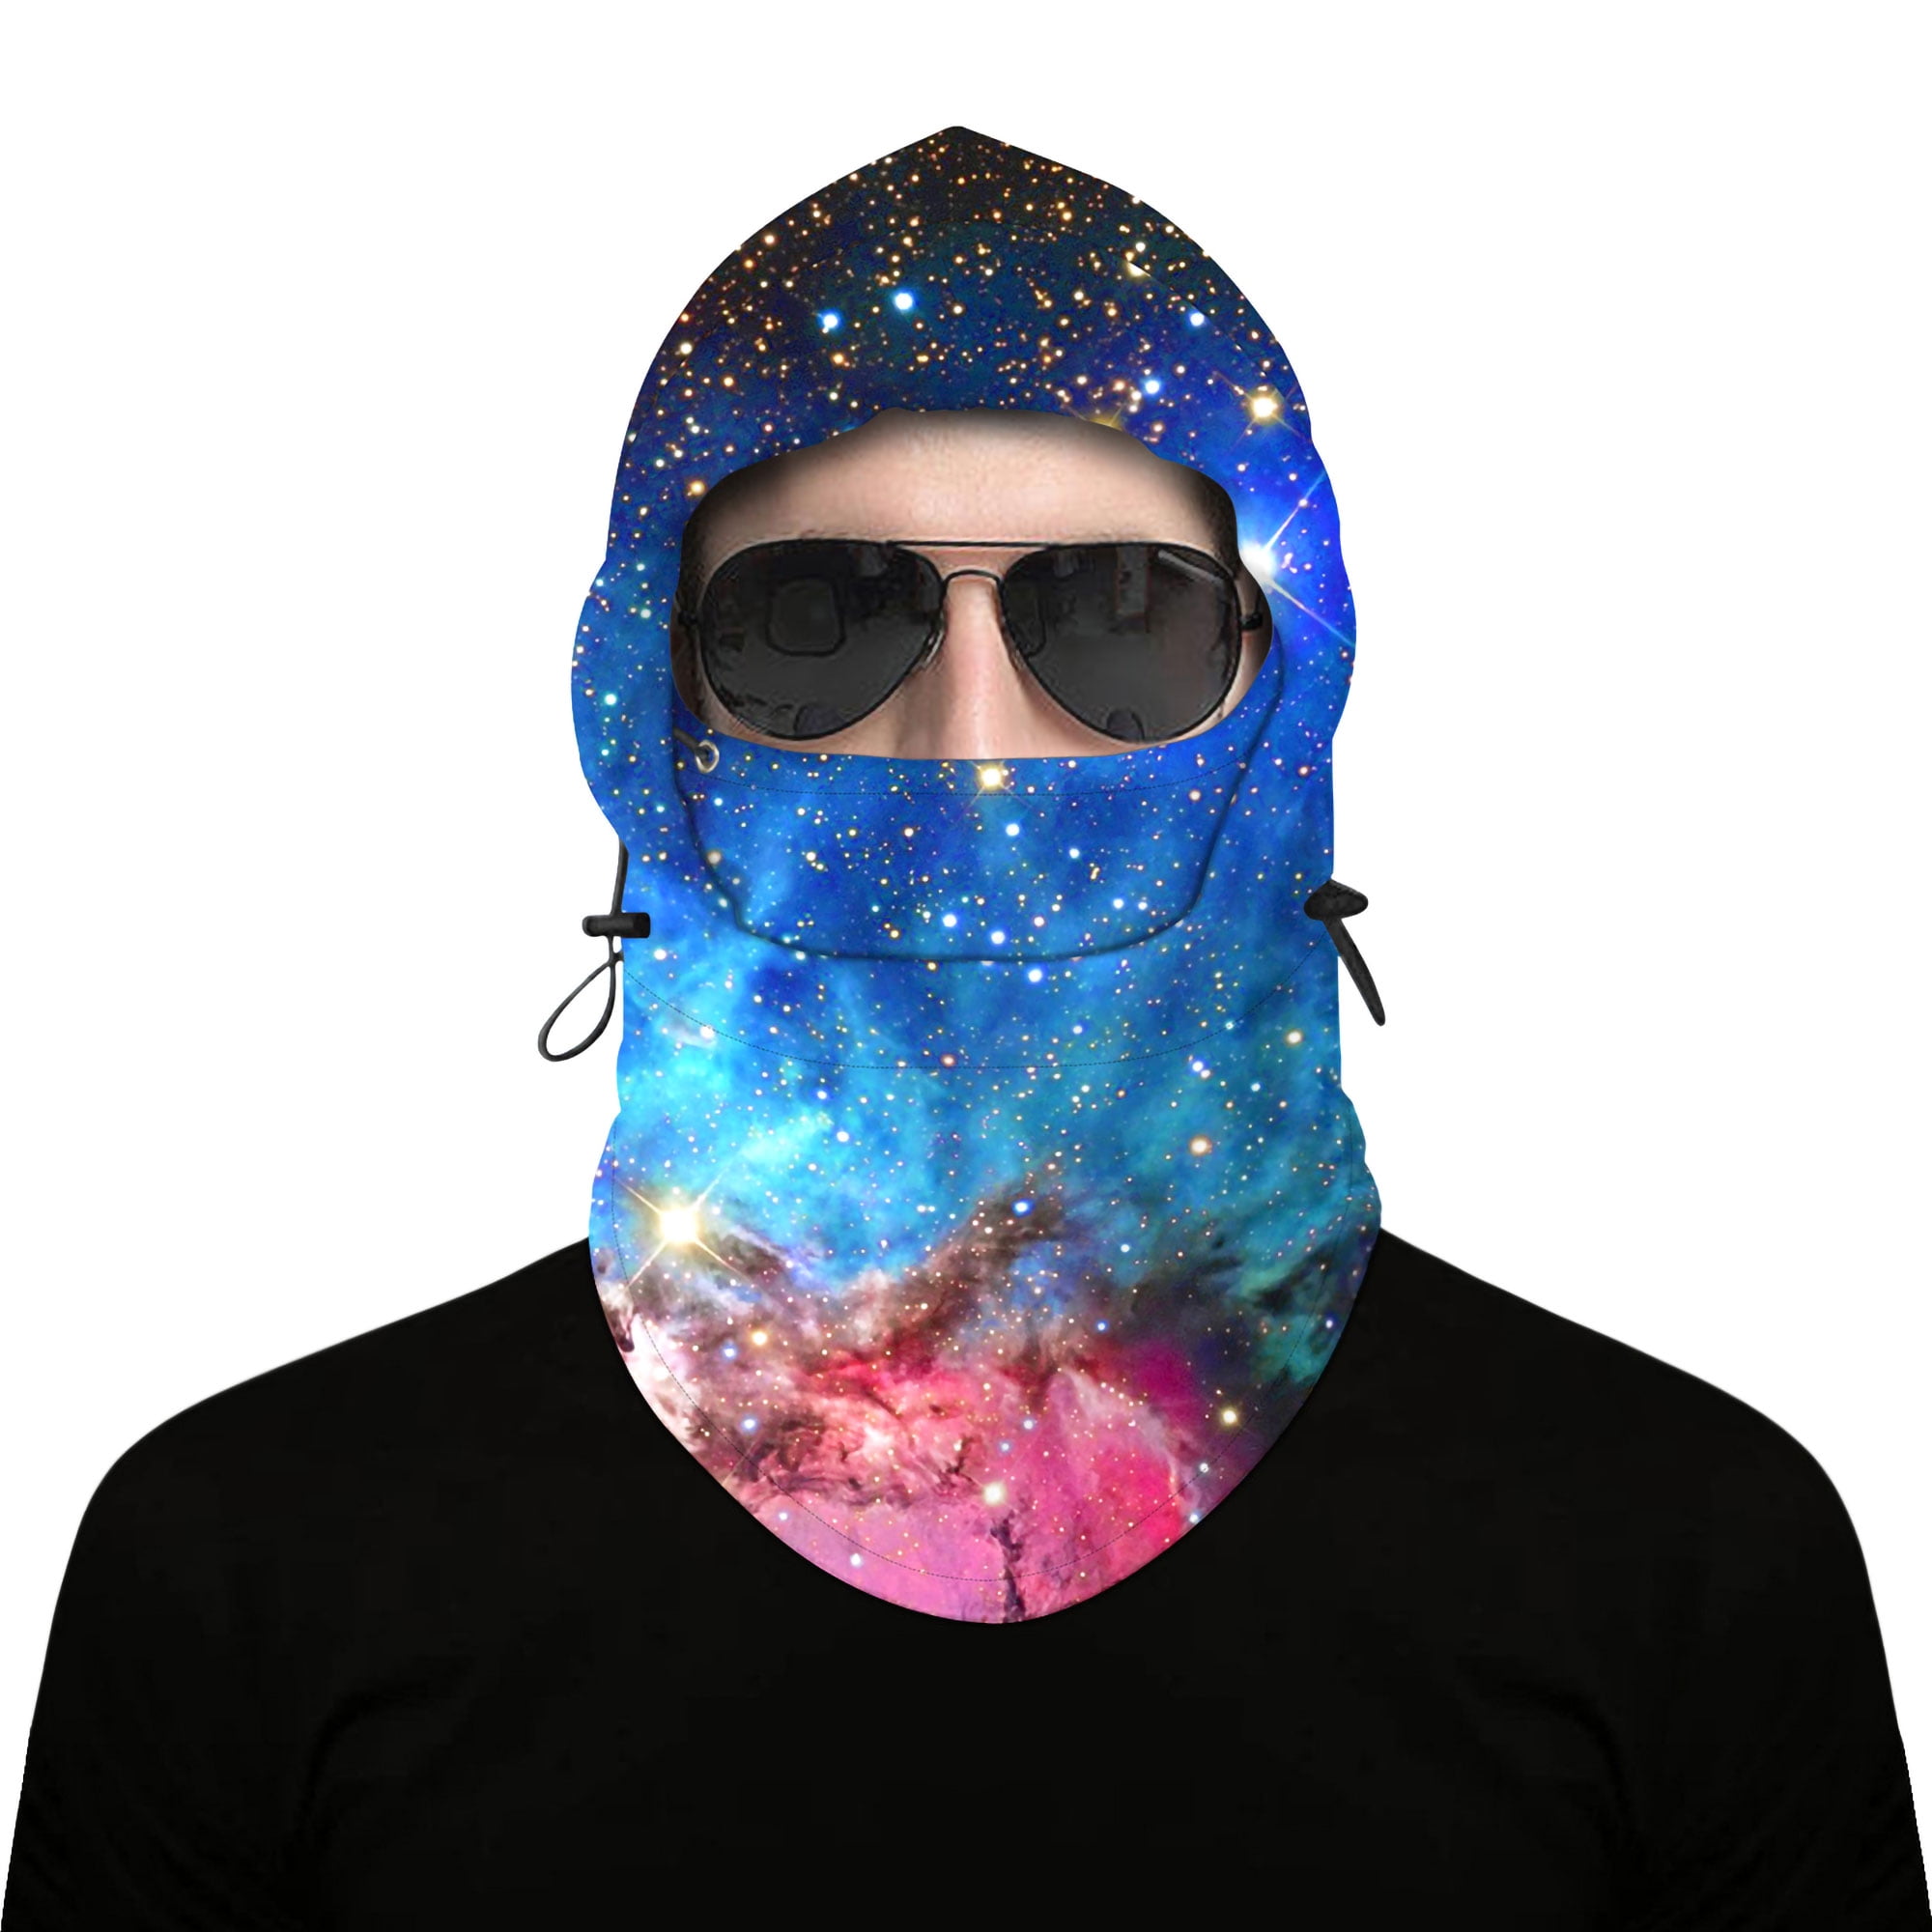 Details about   Face Shield Motorcycle Mask Head Scarf Neck Warmer Skull Ski Outdoor Sun Protect 